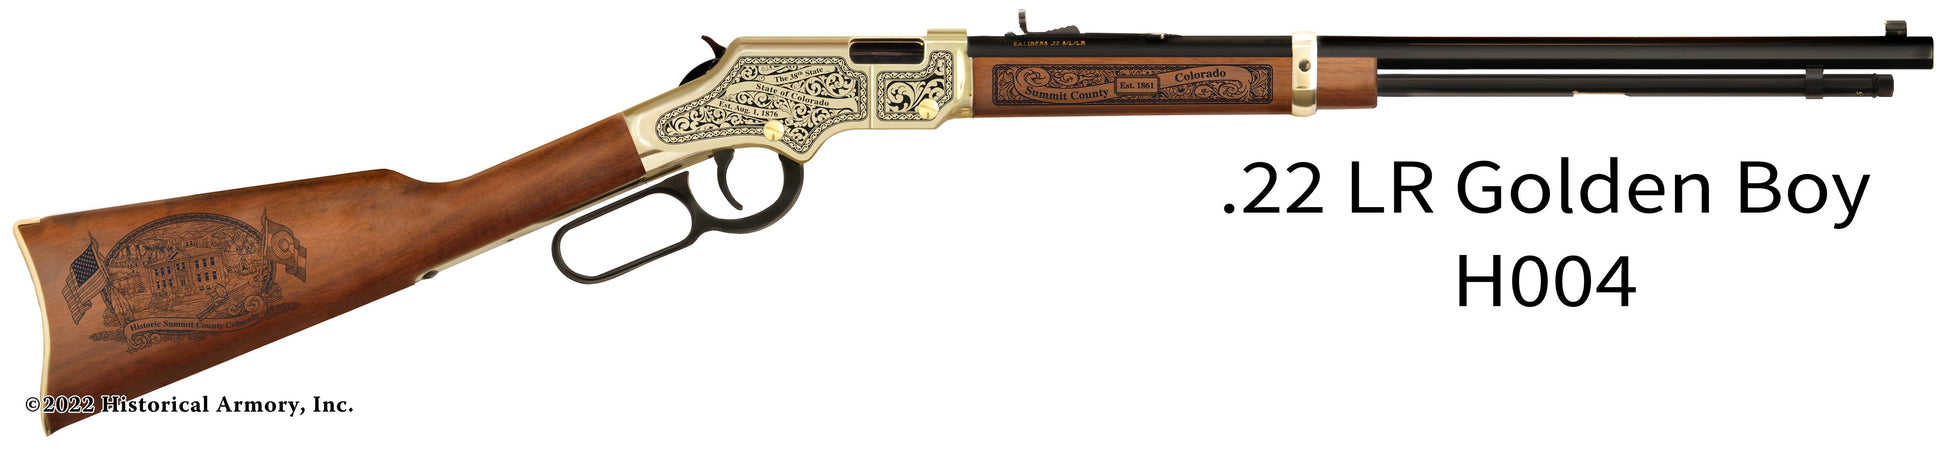 Summit County Colorado Engraved Henry Golden Boy Rifle